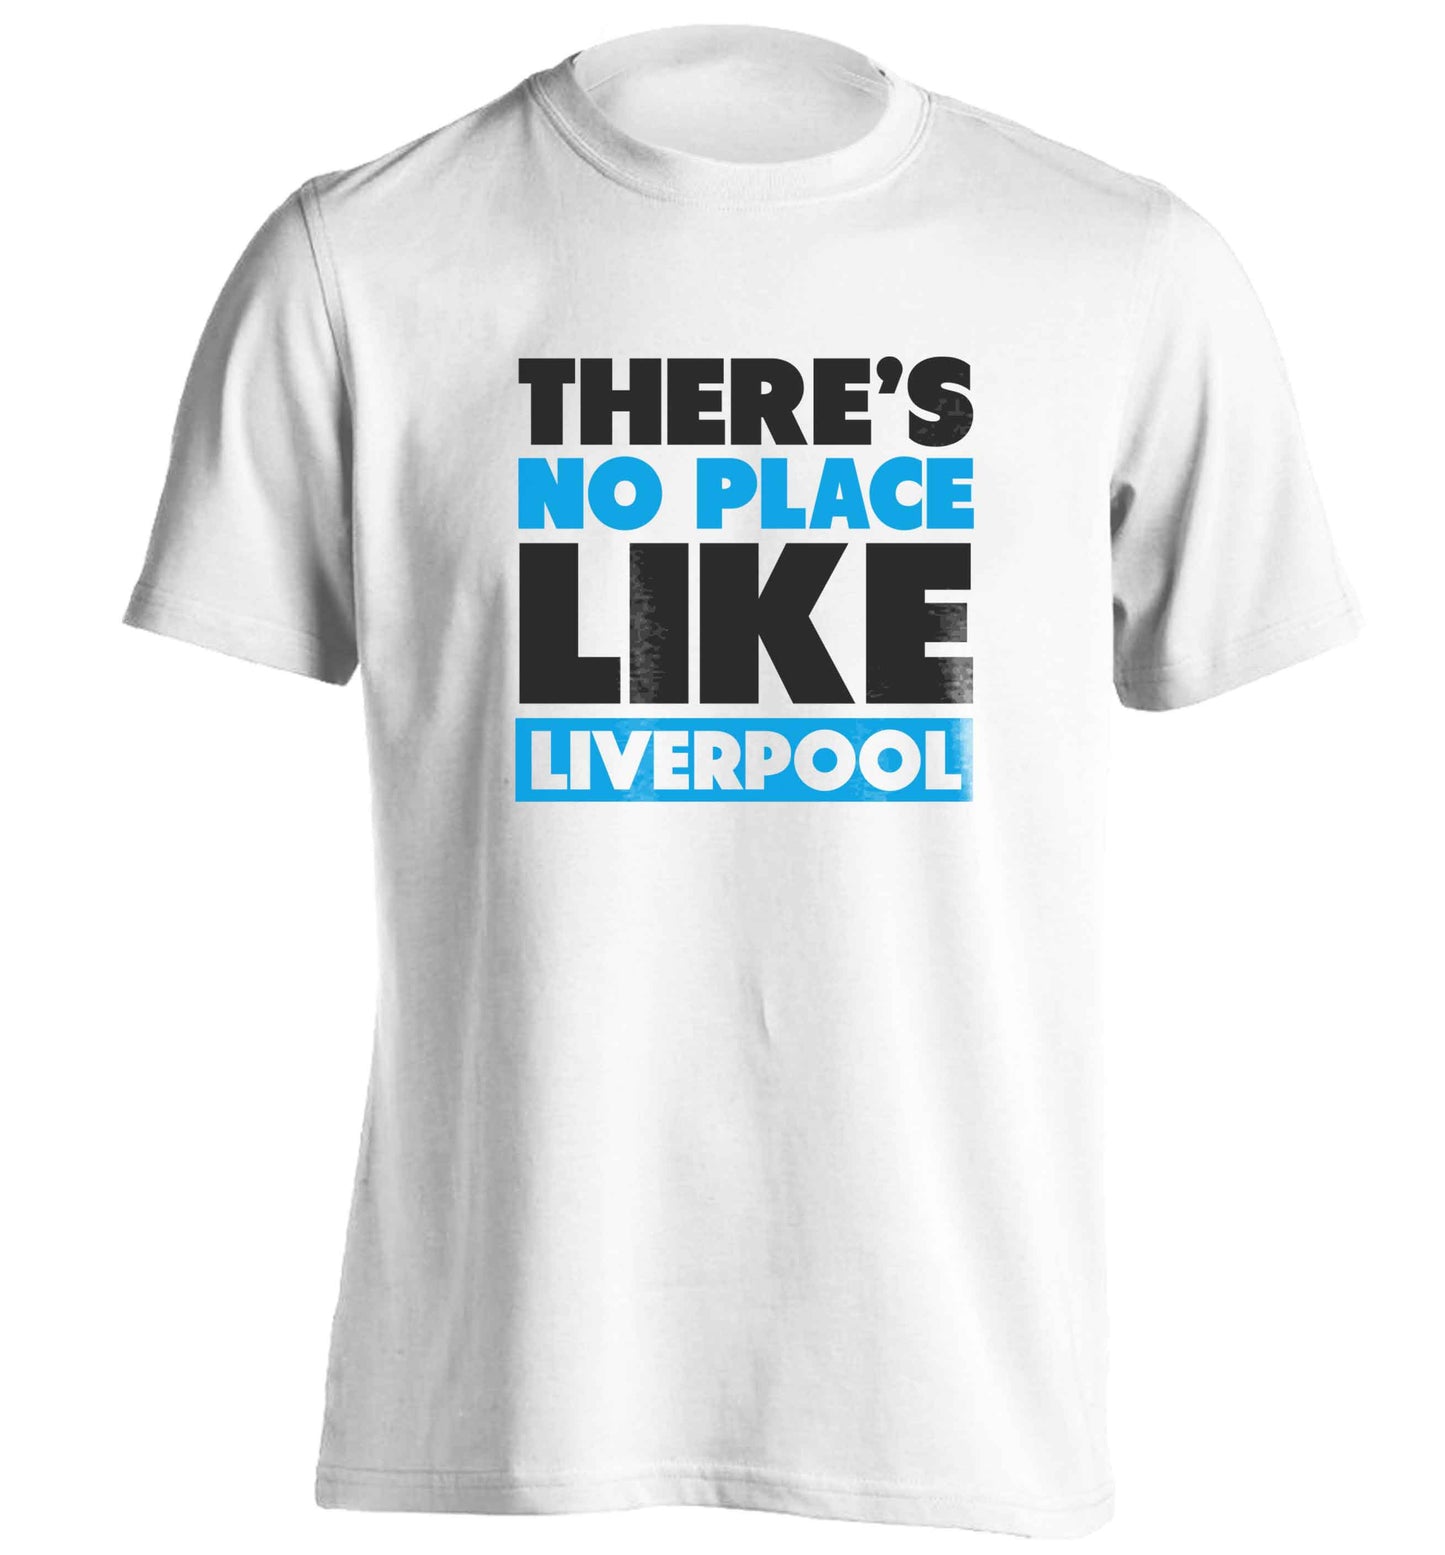 There's no place like Liverpool adults unisex white Tshirt 2XL